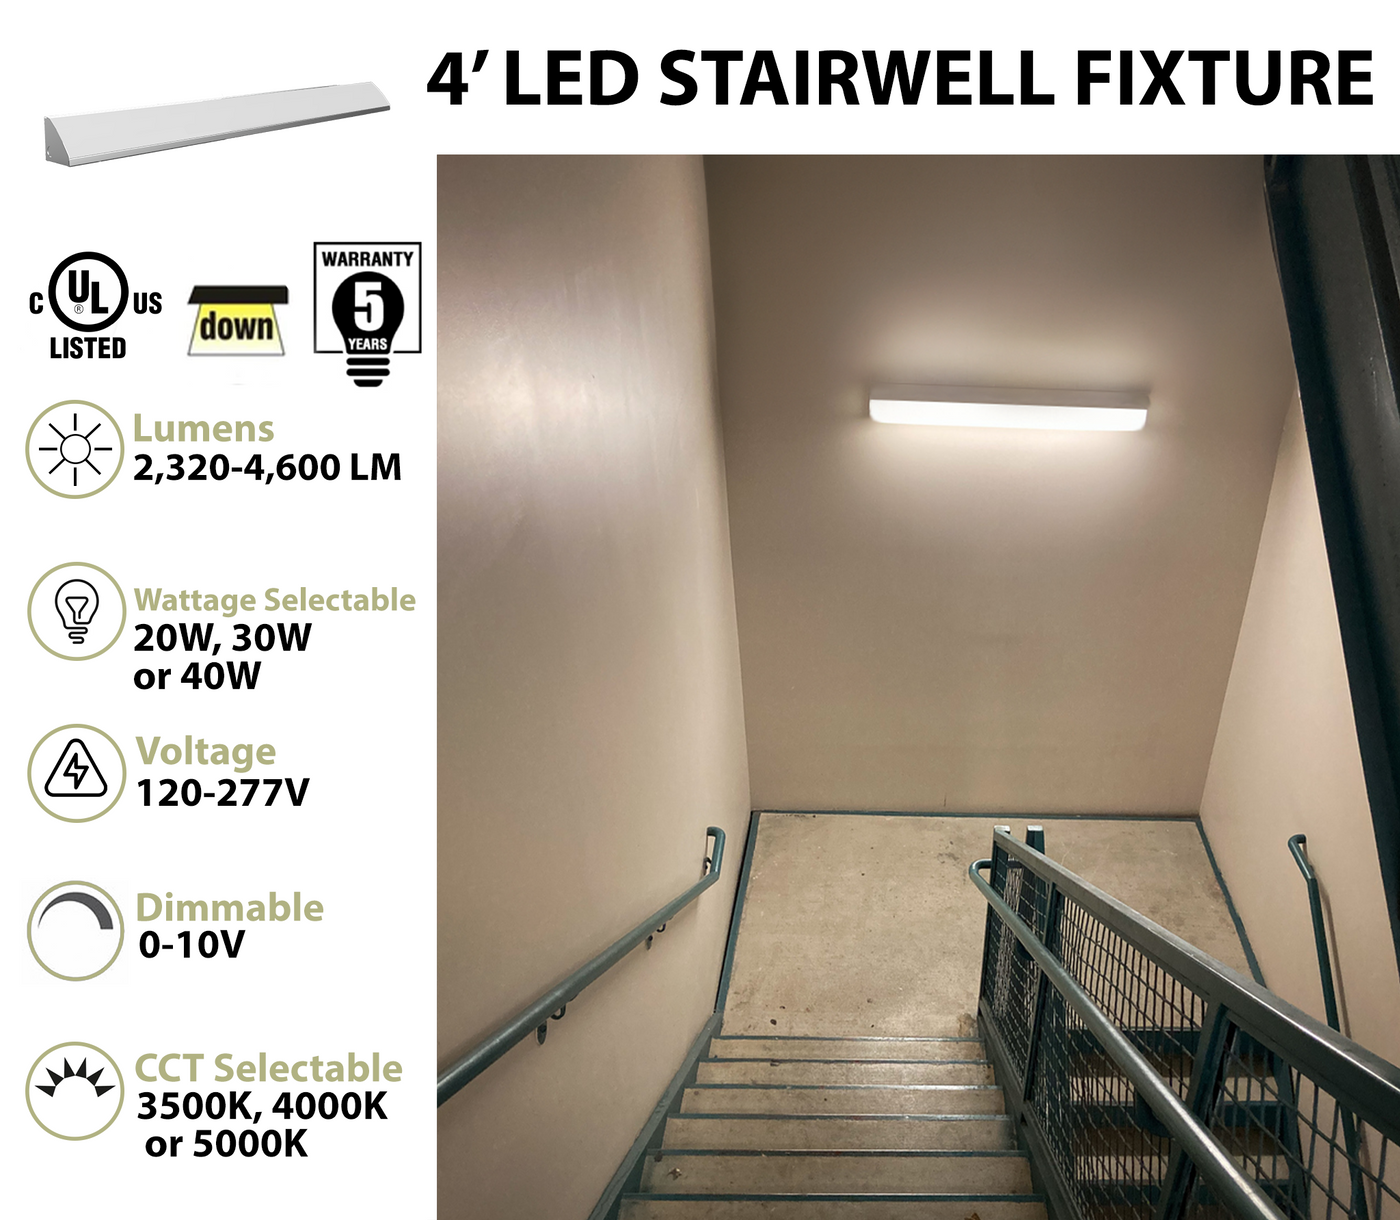 4 Foot LED Stairwell Light, 4600 Lumen Max, Wattage and CCT Selectable, 120-277V